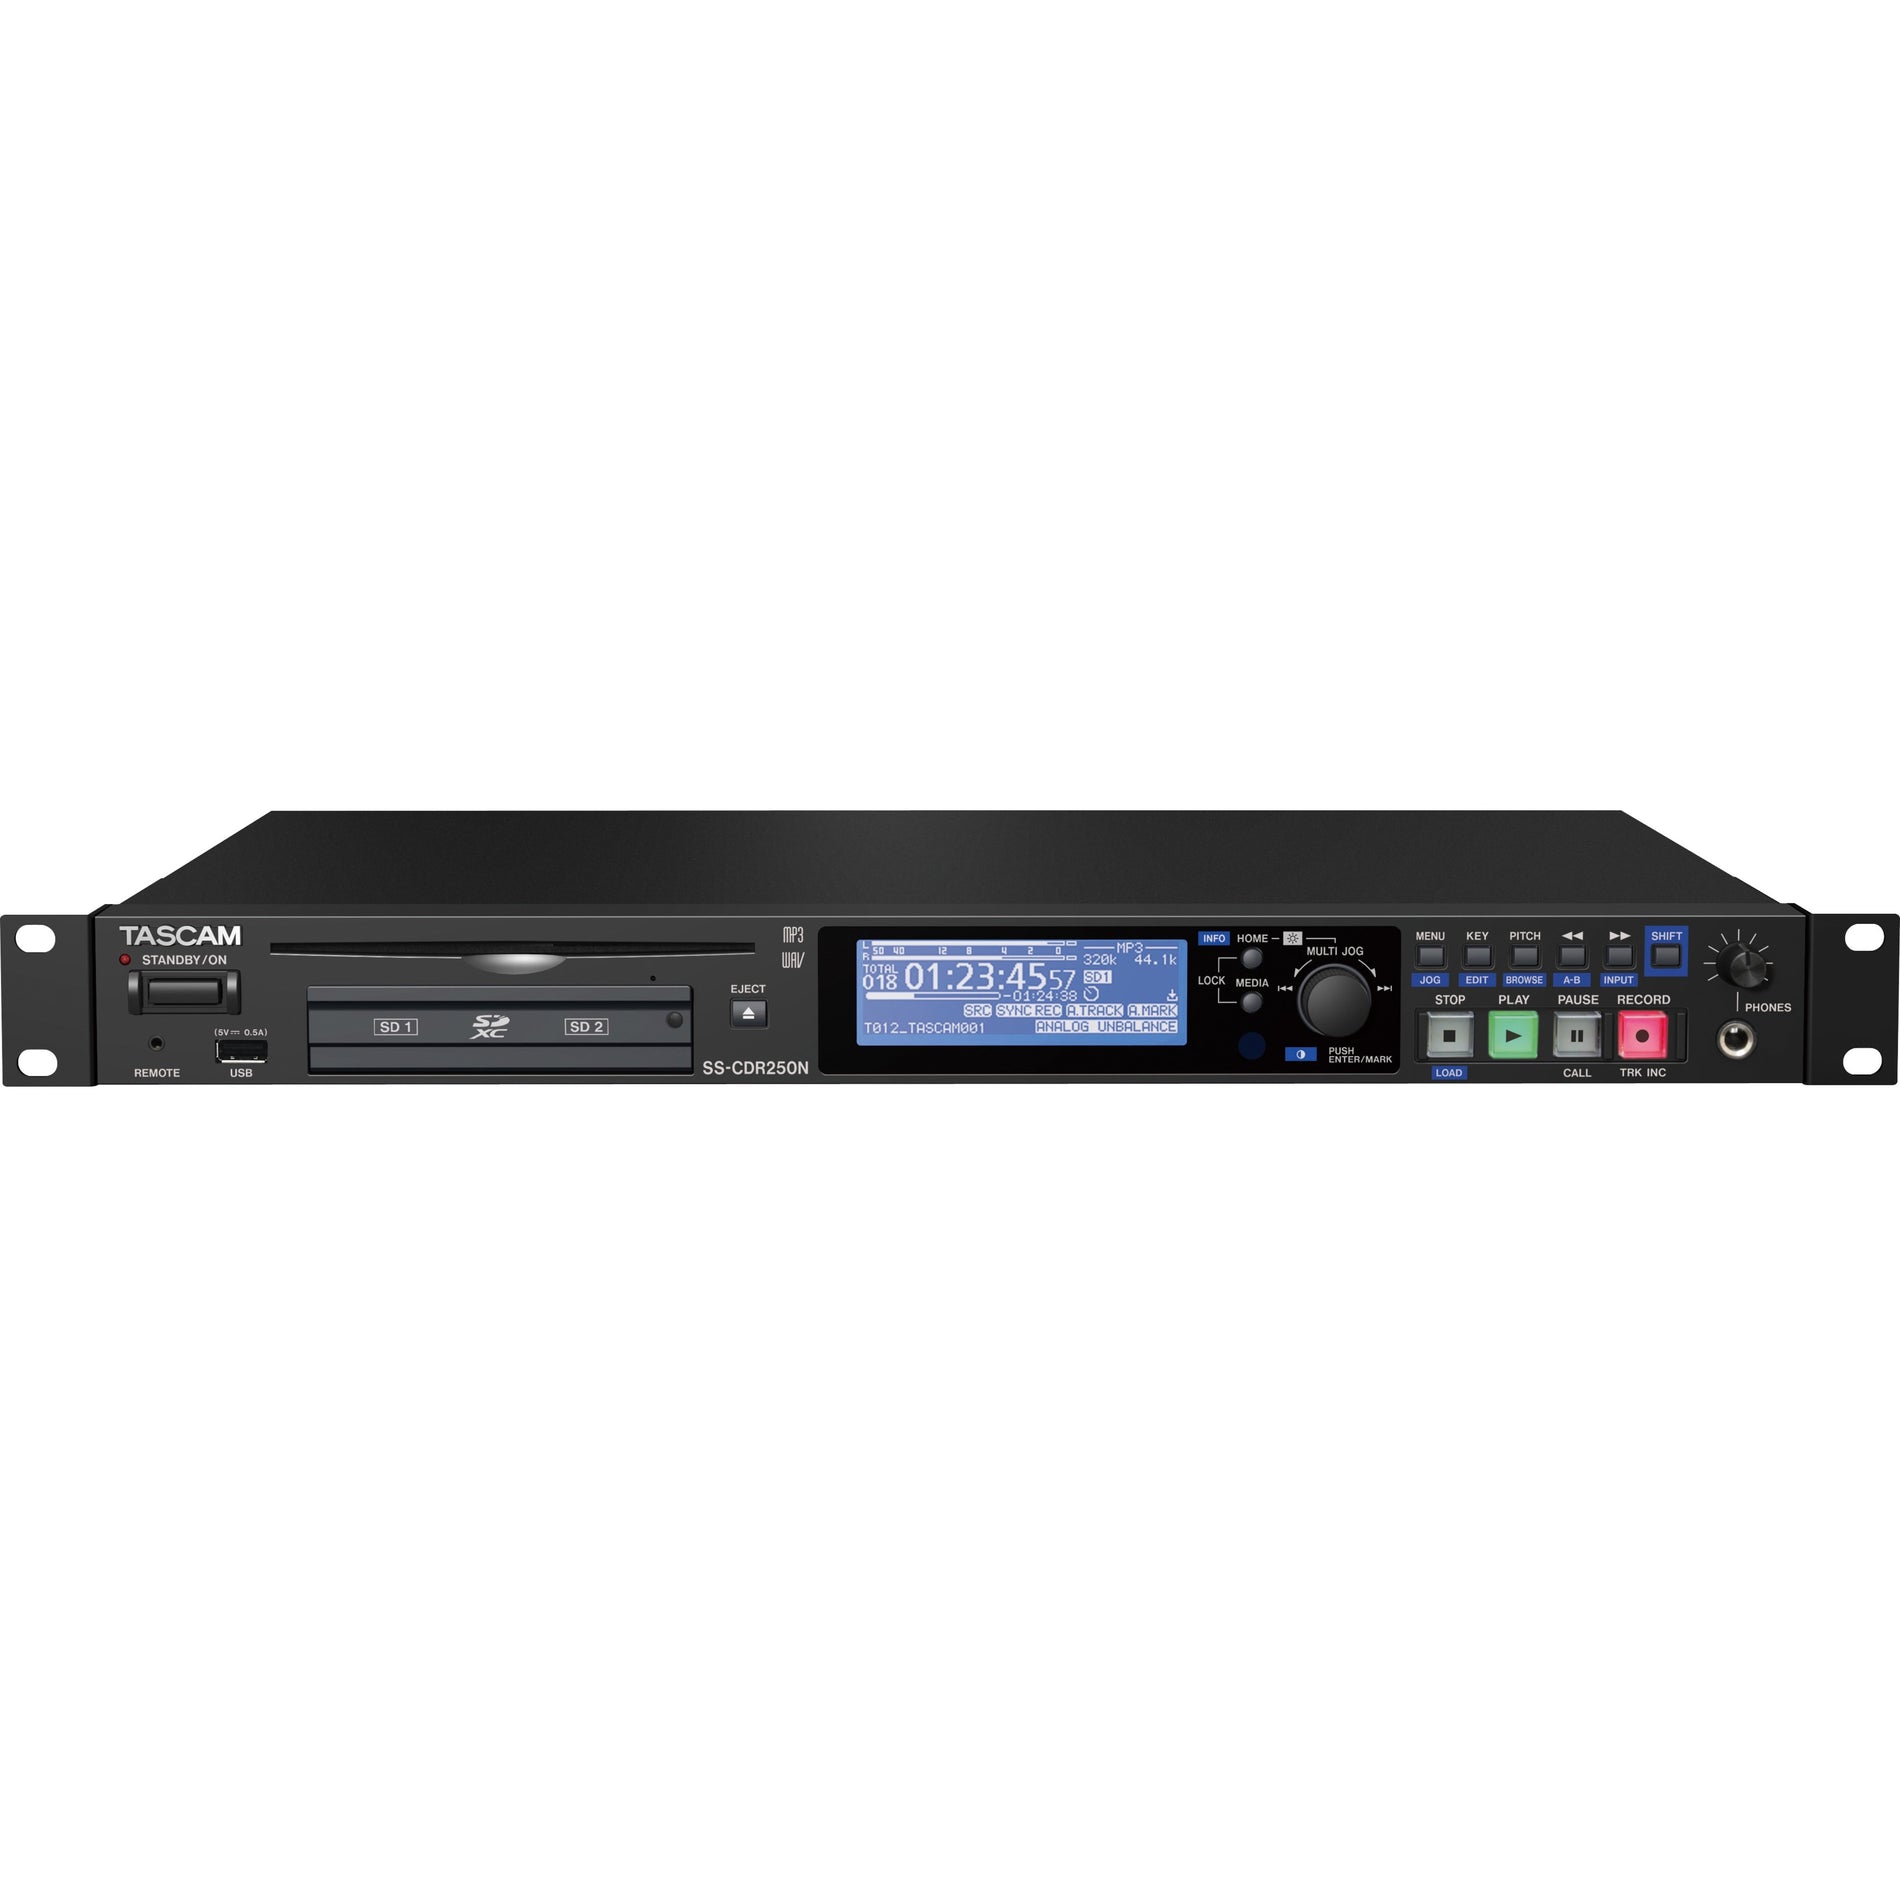 TASCAM SS-CDR250N Two-Channel Networking CD/Media Recorder, Dual SD, CDR